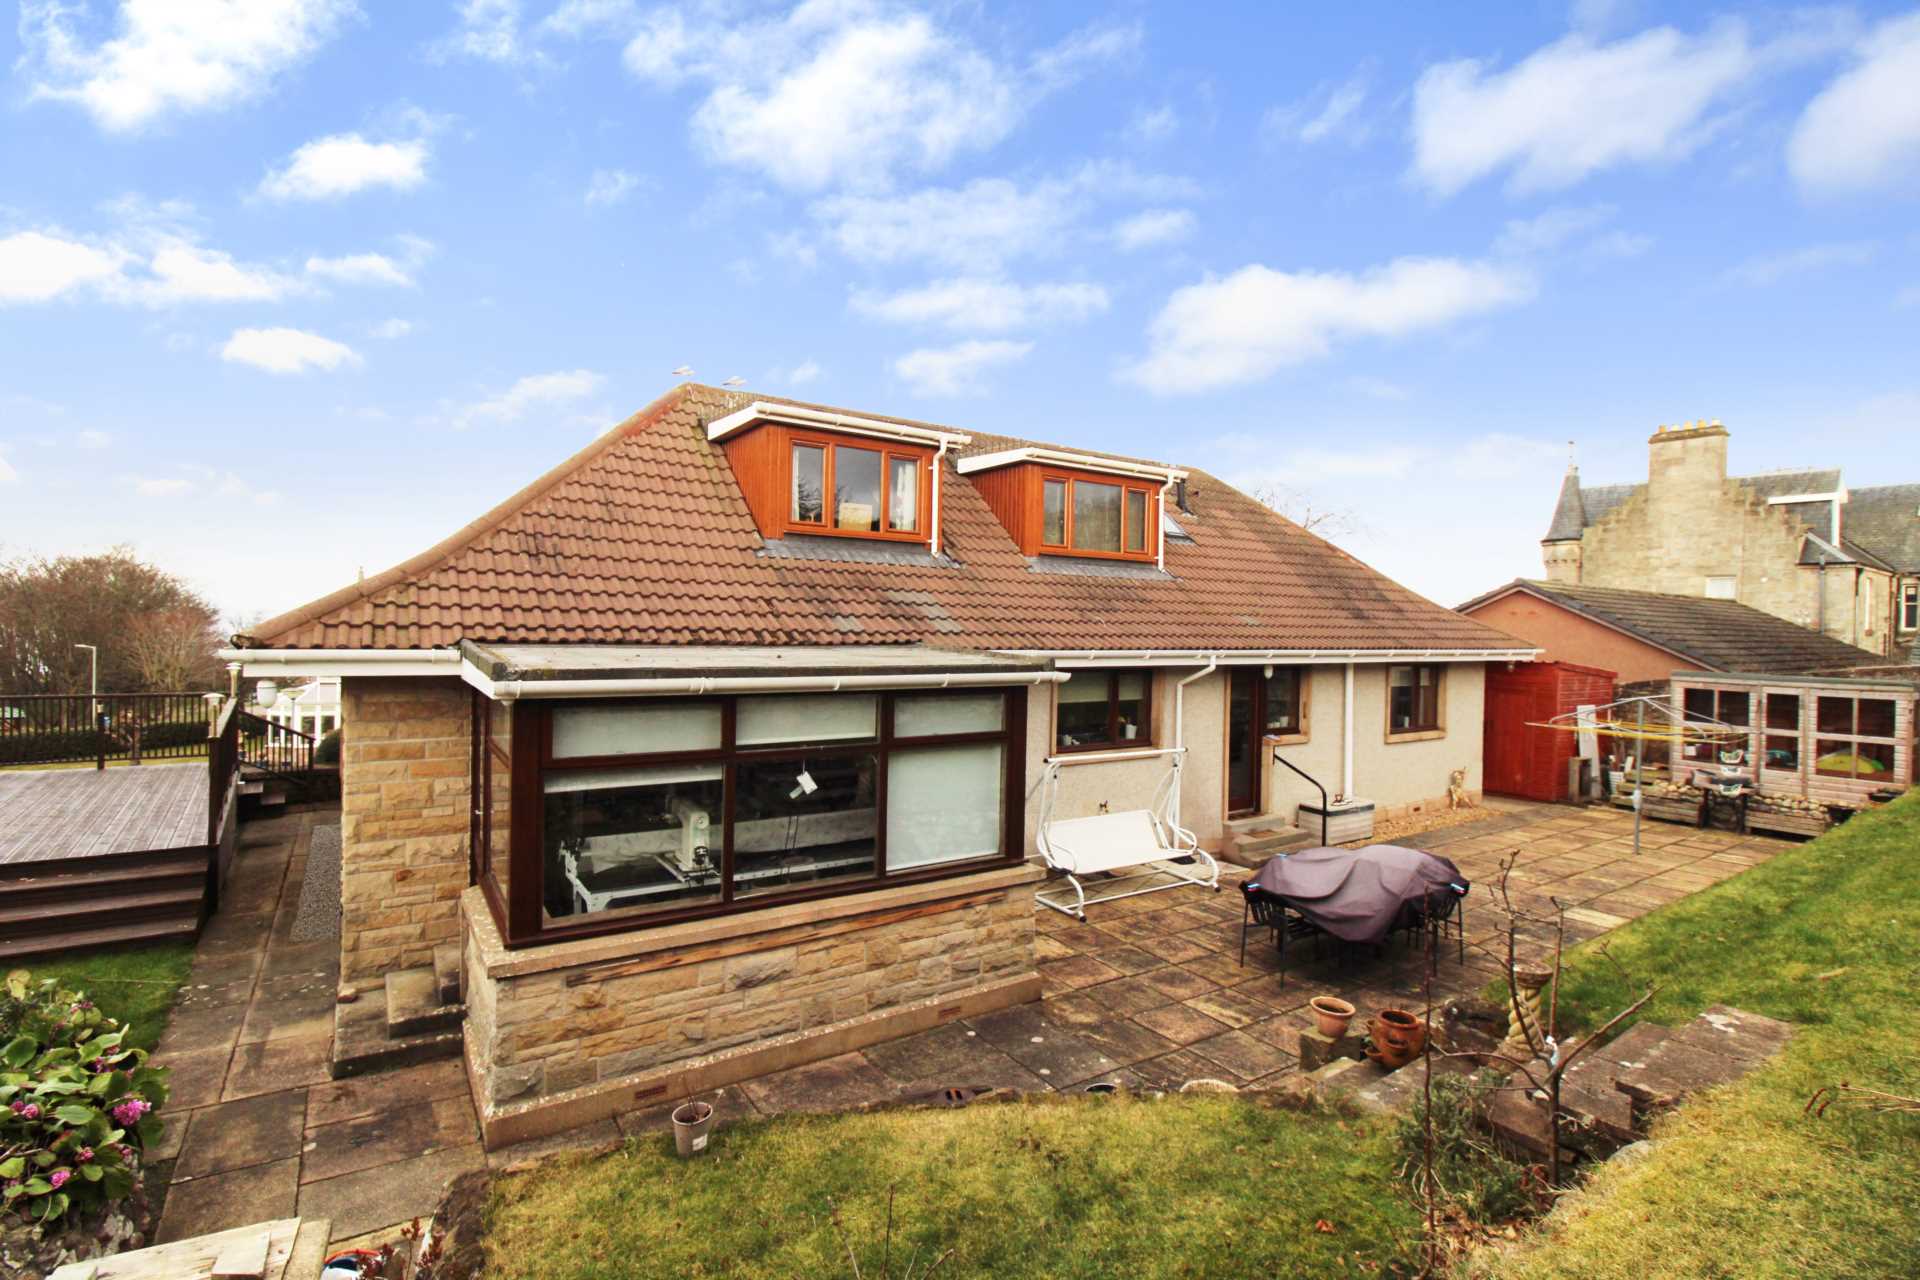 CLOSING DATE SET WEDNESDAY 20 MARCH AT 12PM Arkle, Glebe Road, Image 34